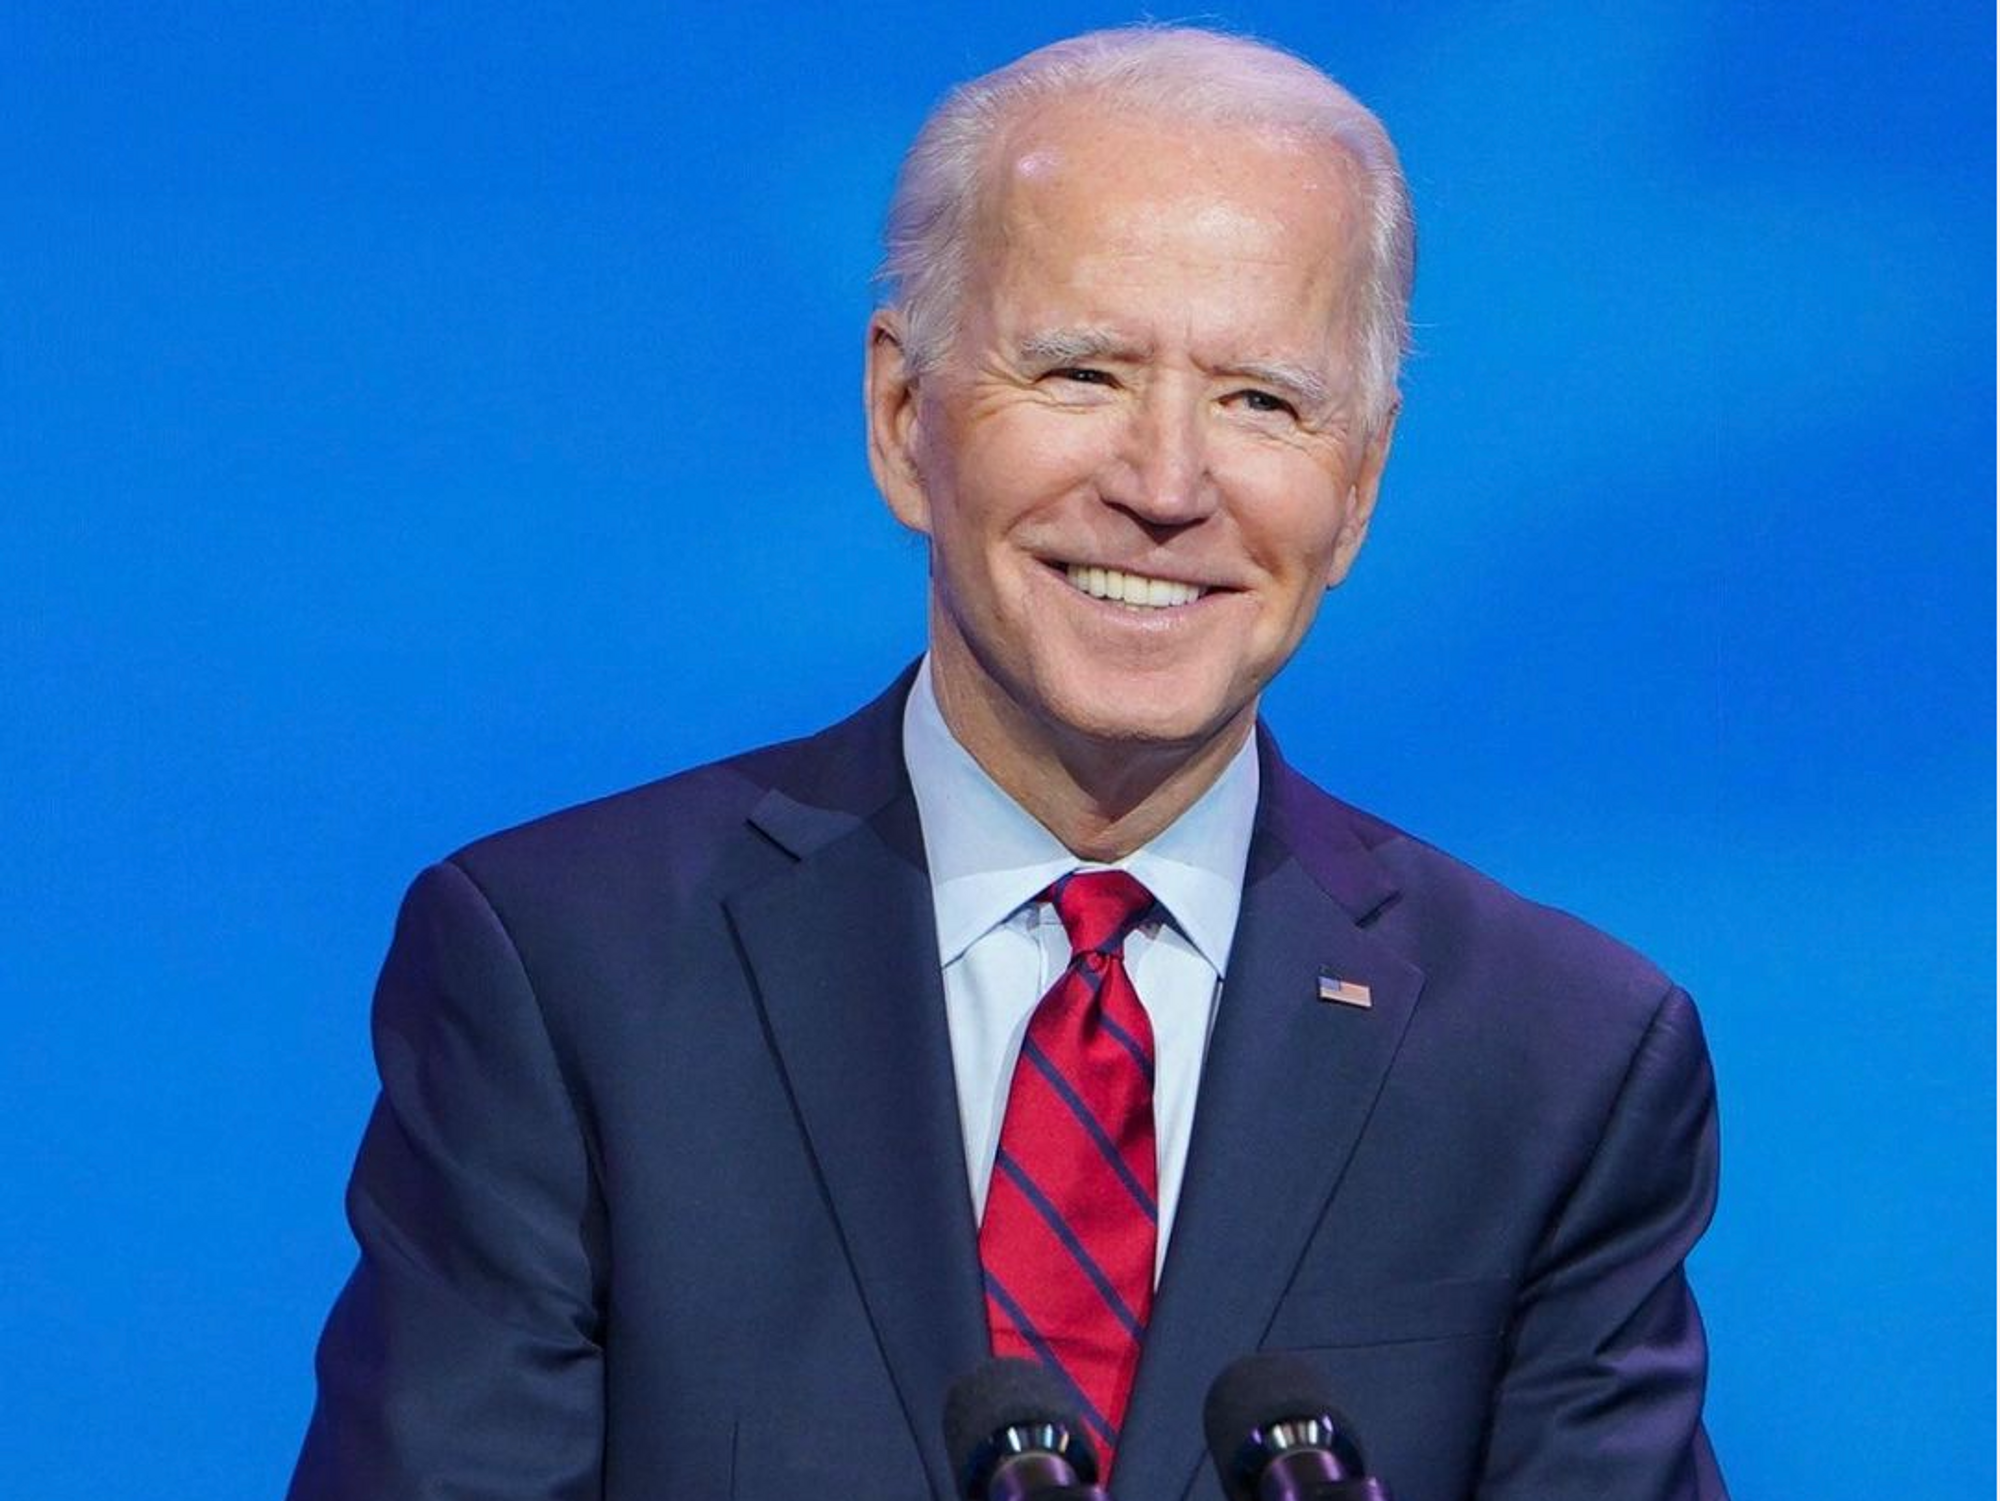 Biden Sports Strong Opening Approval Numbers